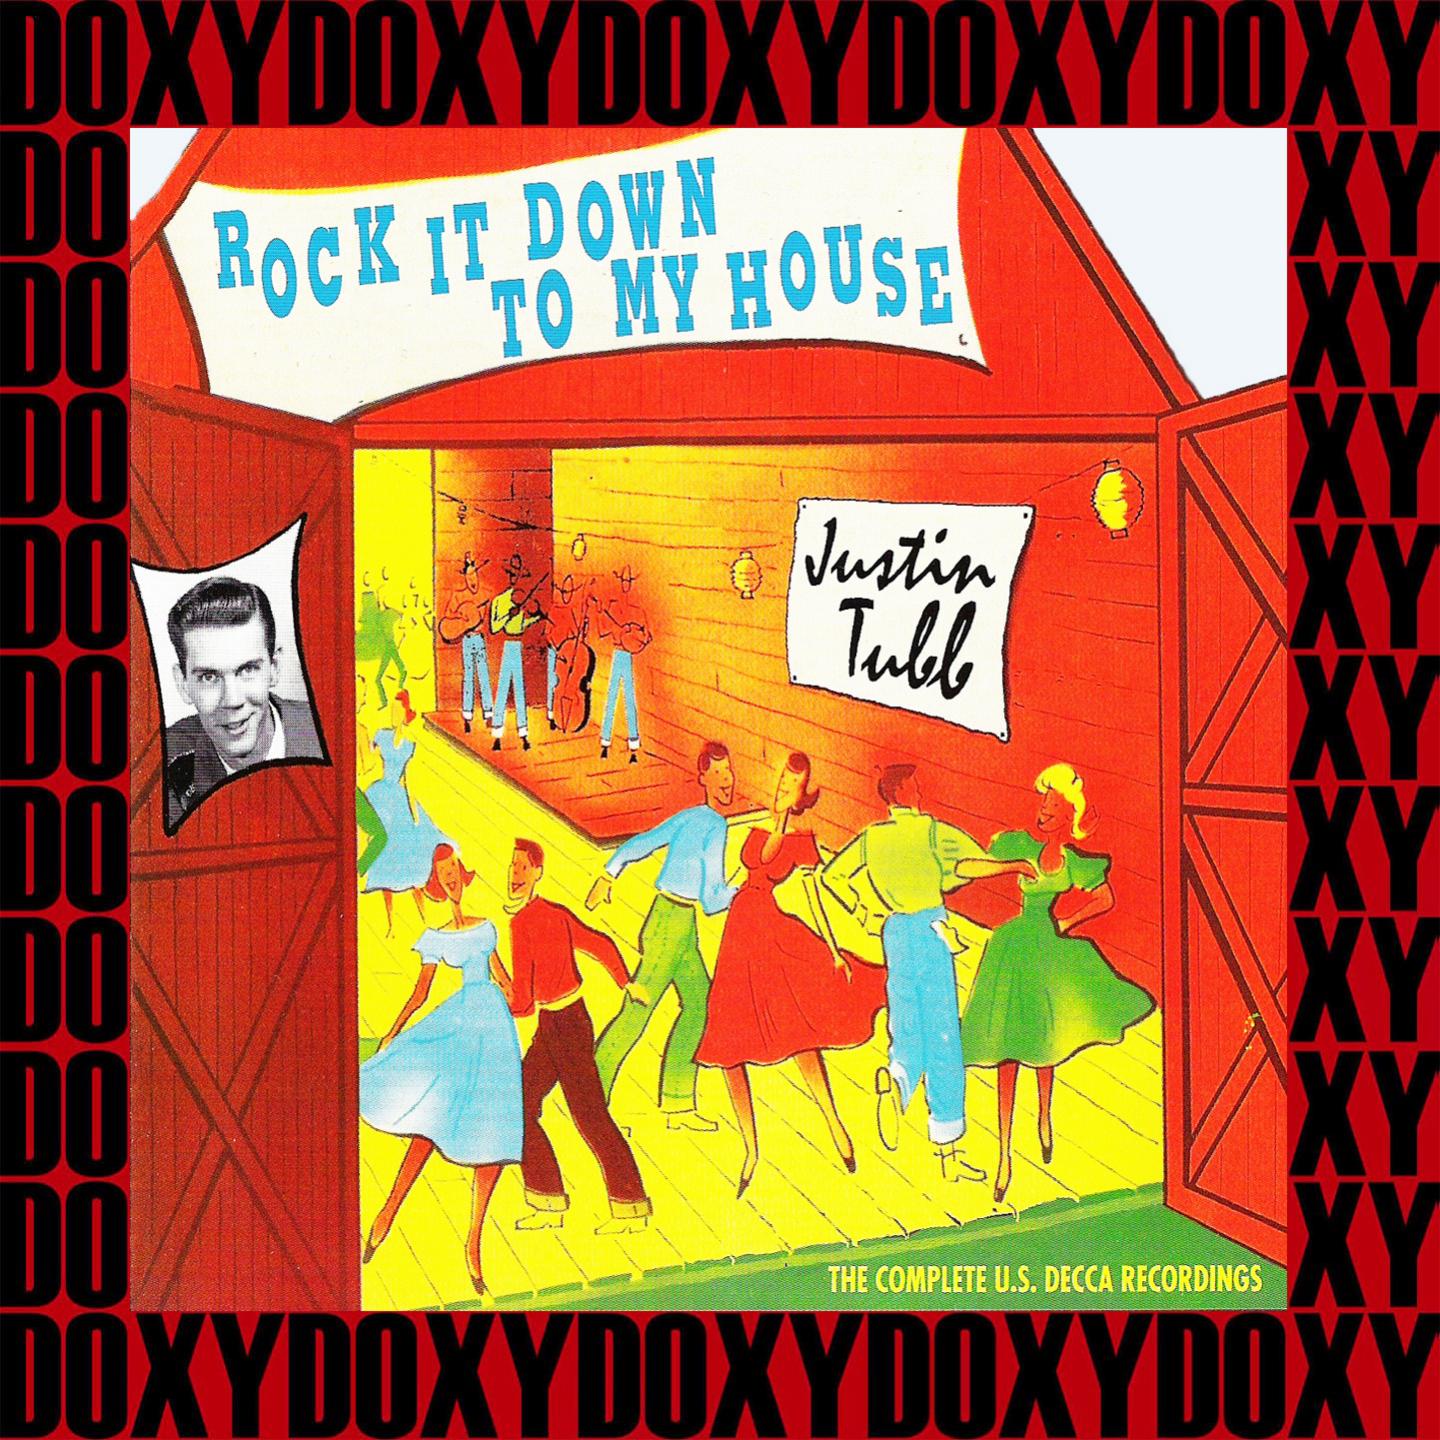 Rock It Down to My House, Vol.1 (Remastered Version) (Doxy Collection)